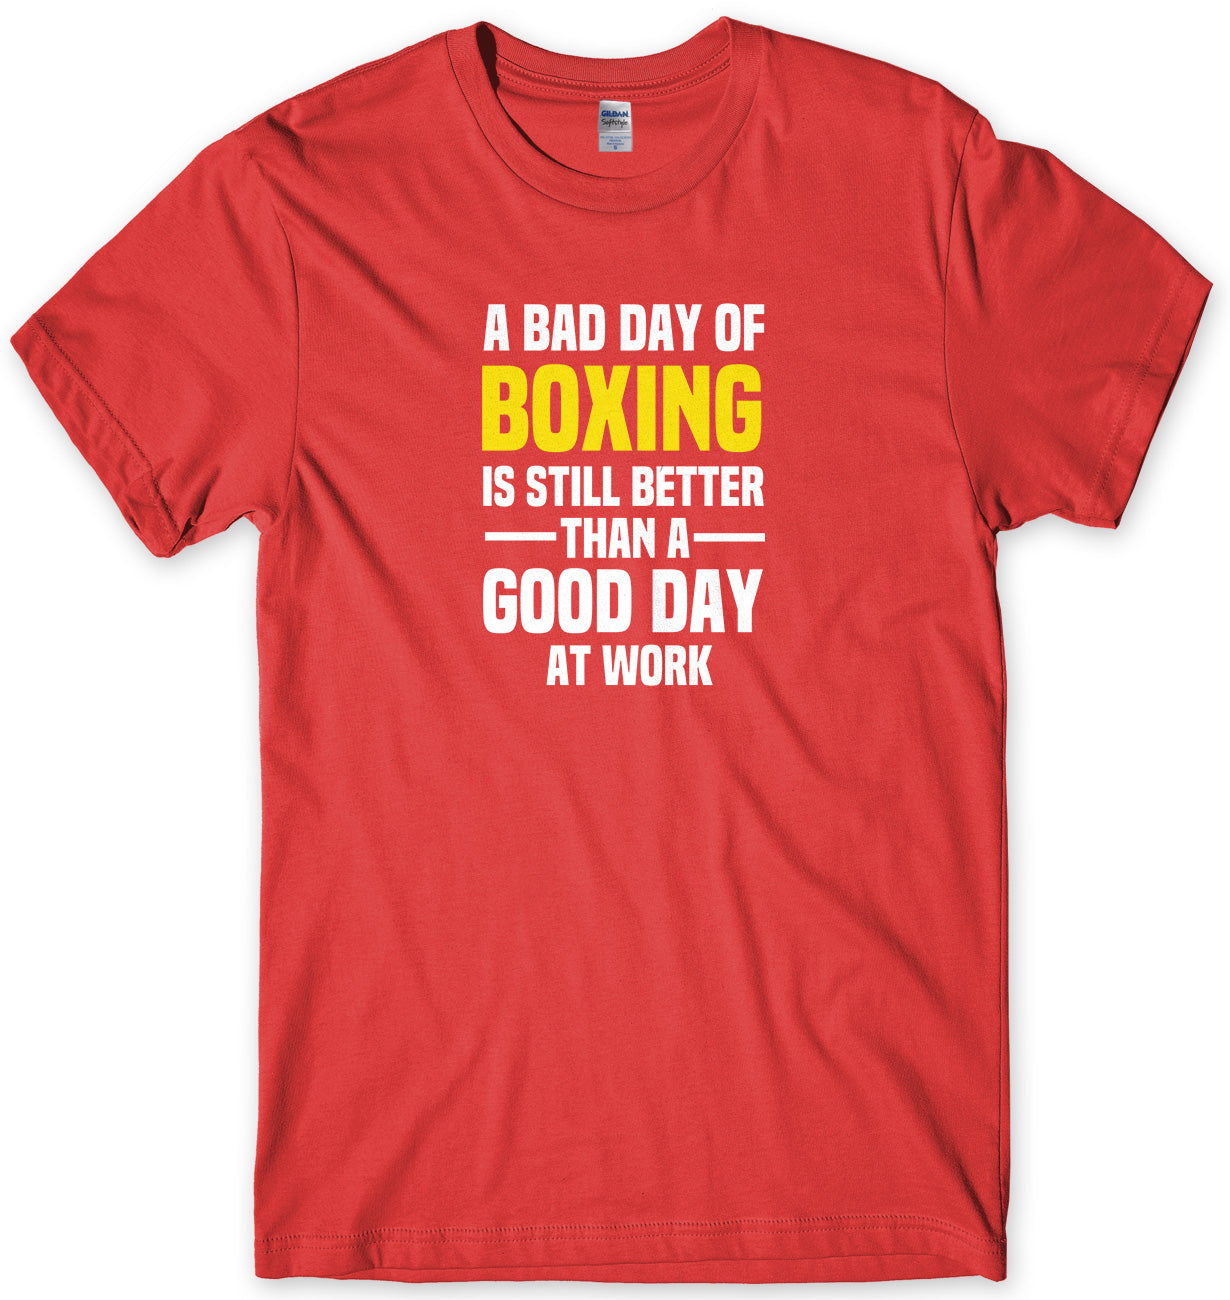 A BAD DAY OF BOXING IS STILL BETTER THAN A GOOD DAY AT WORK MENS FUNNY SLOGAN UNISEX T-SHIRT - StreetSide Surgeons